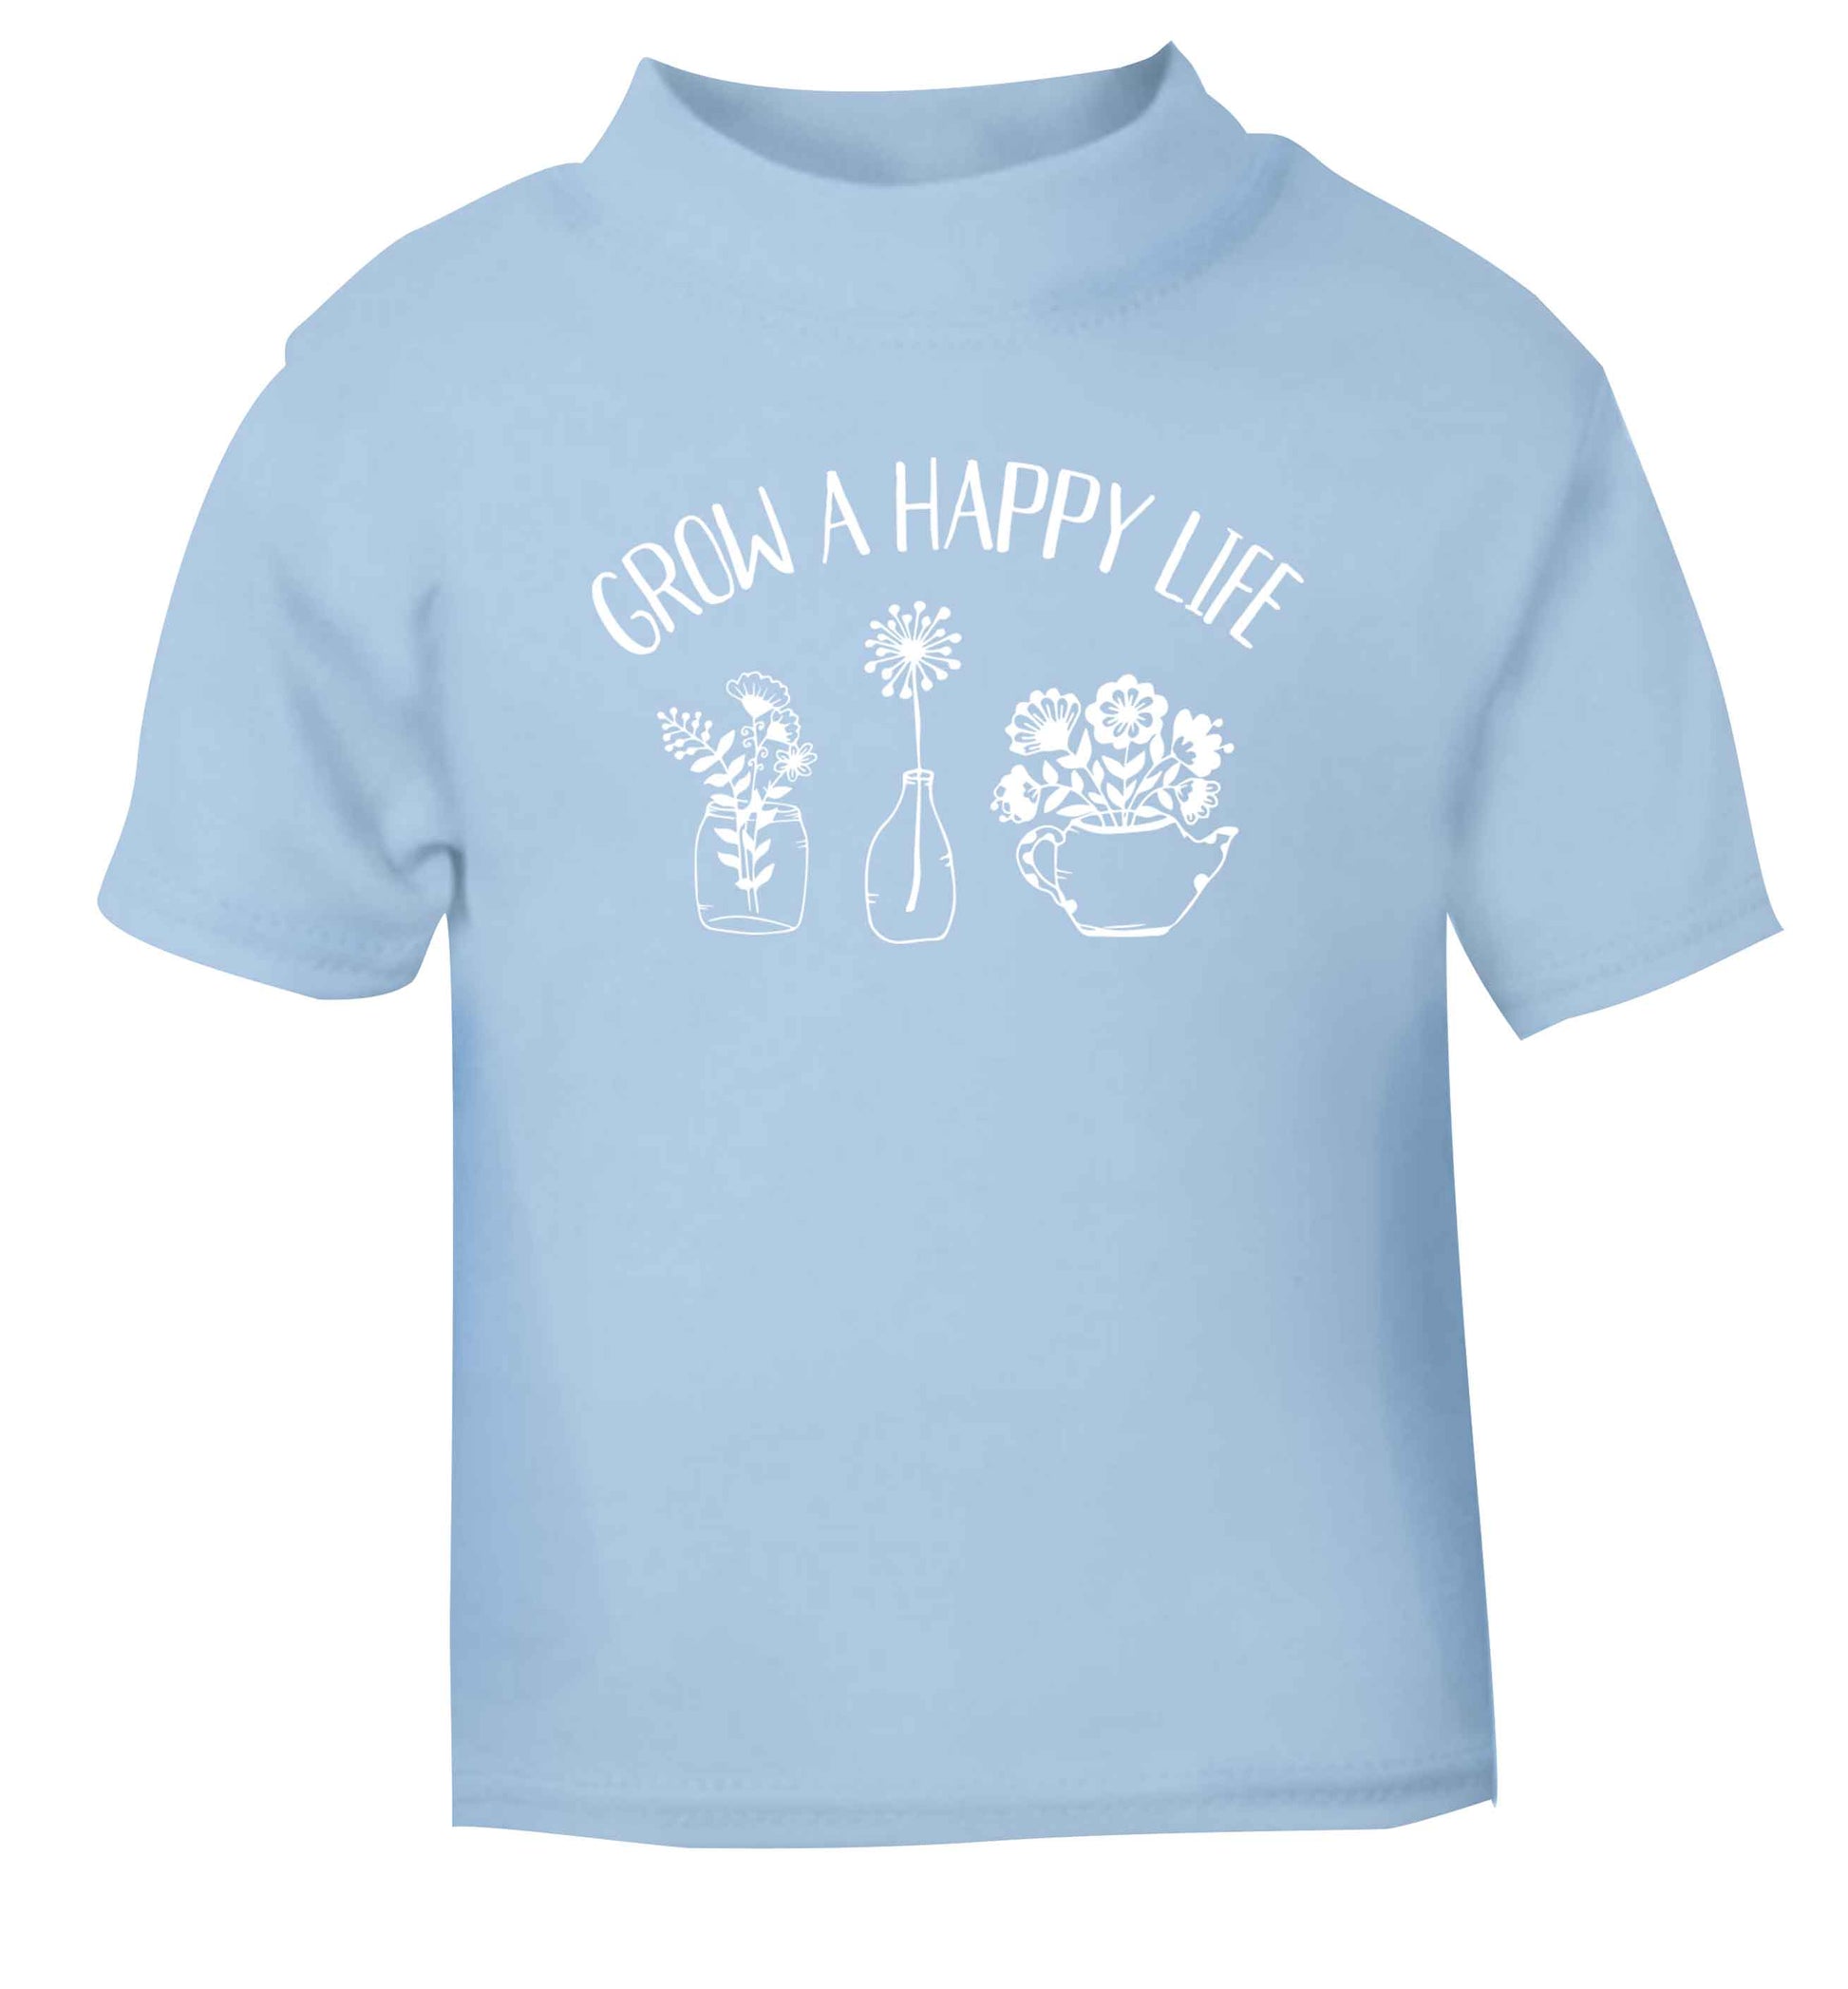 Grow a happy life light blue Baby Toddler Tshirt 2 Years